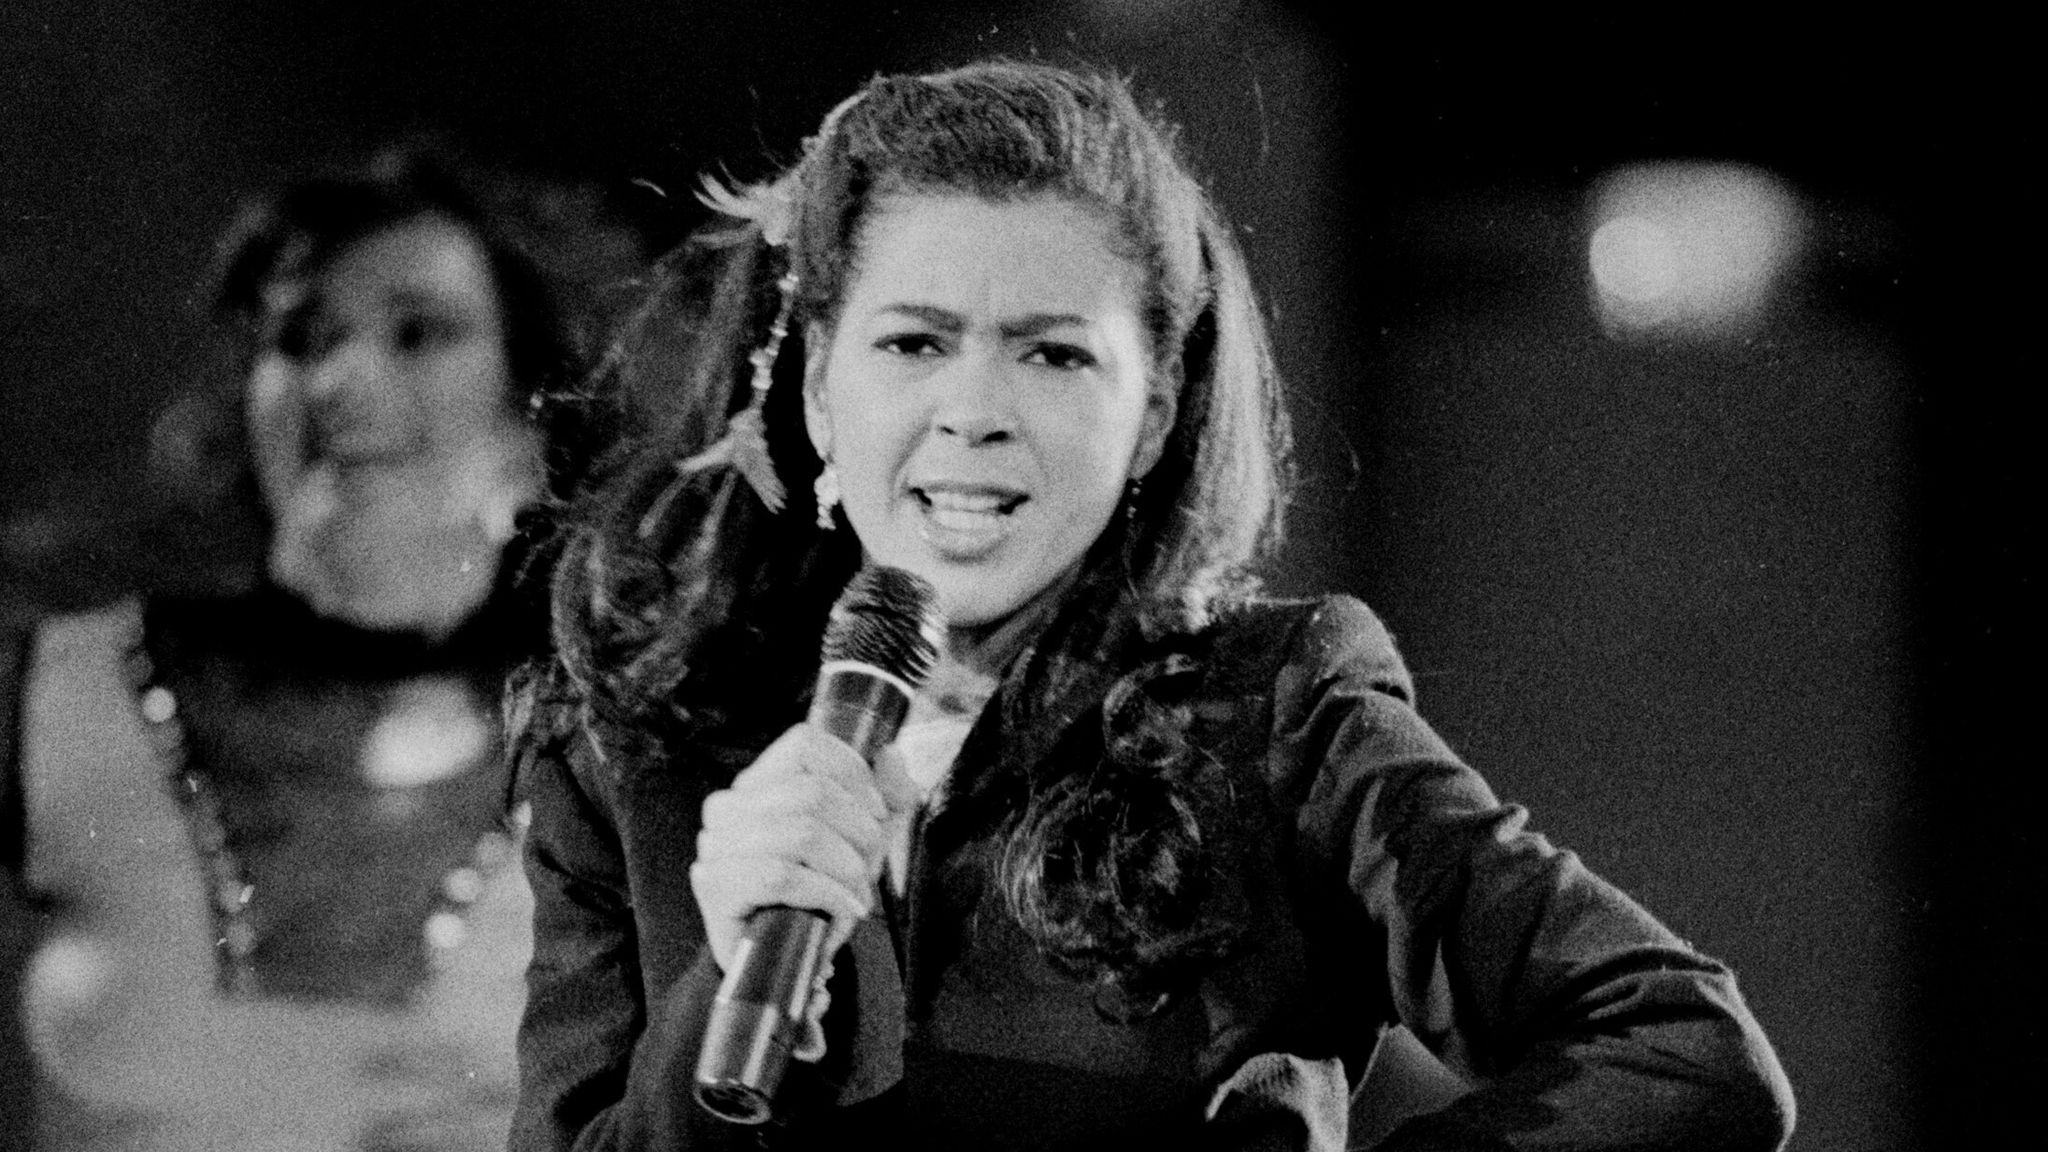 Flashdance and Fame singer Irene Cara dies aged 63 Ents & Arts News